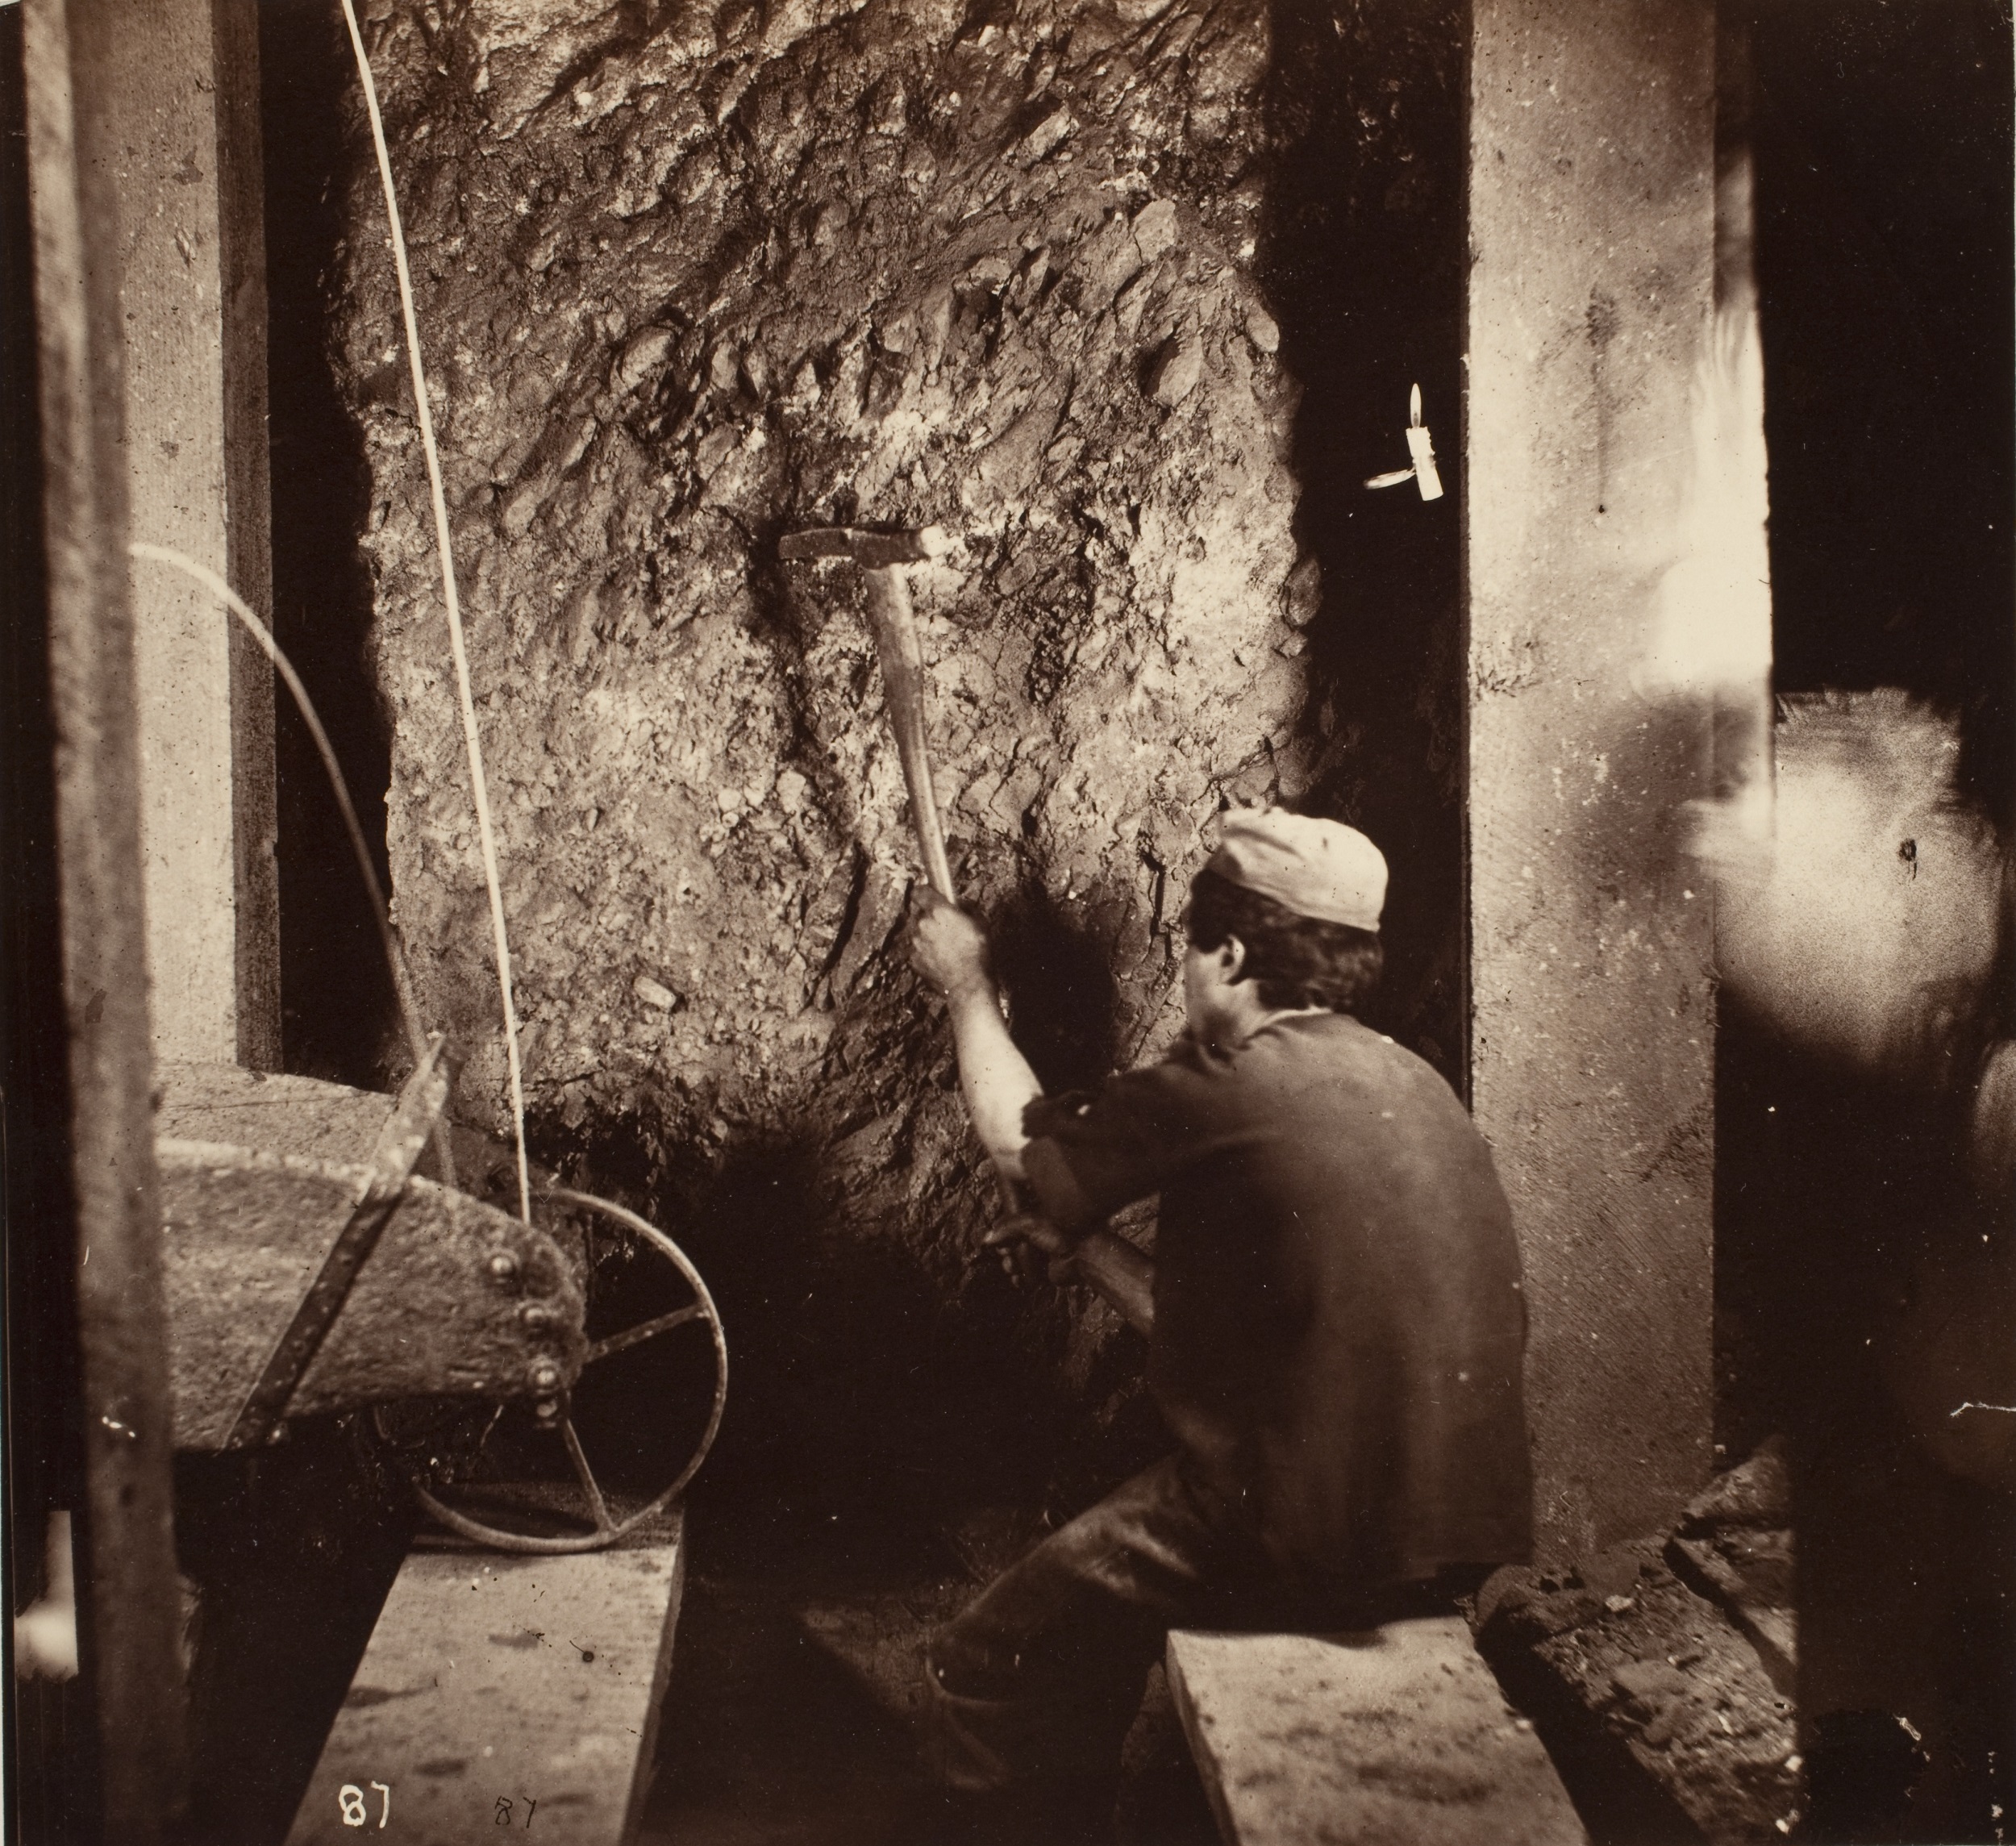 Black-and-white photograph of a worker in a mine using a pickaxe on a rocky wall